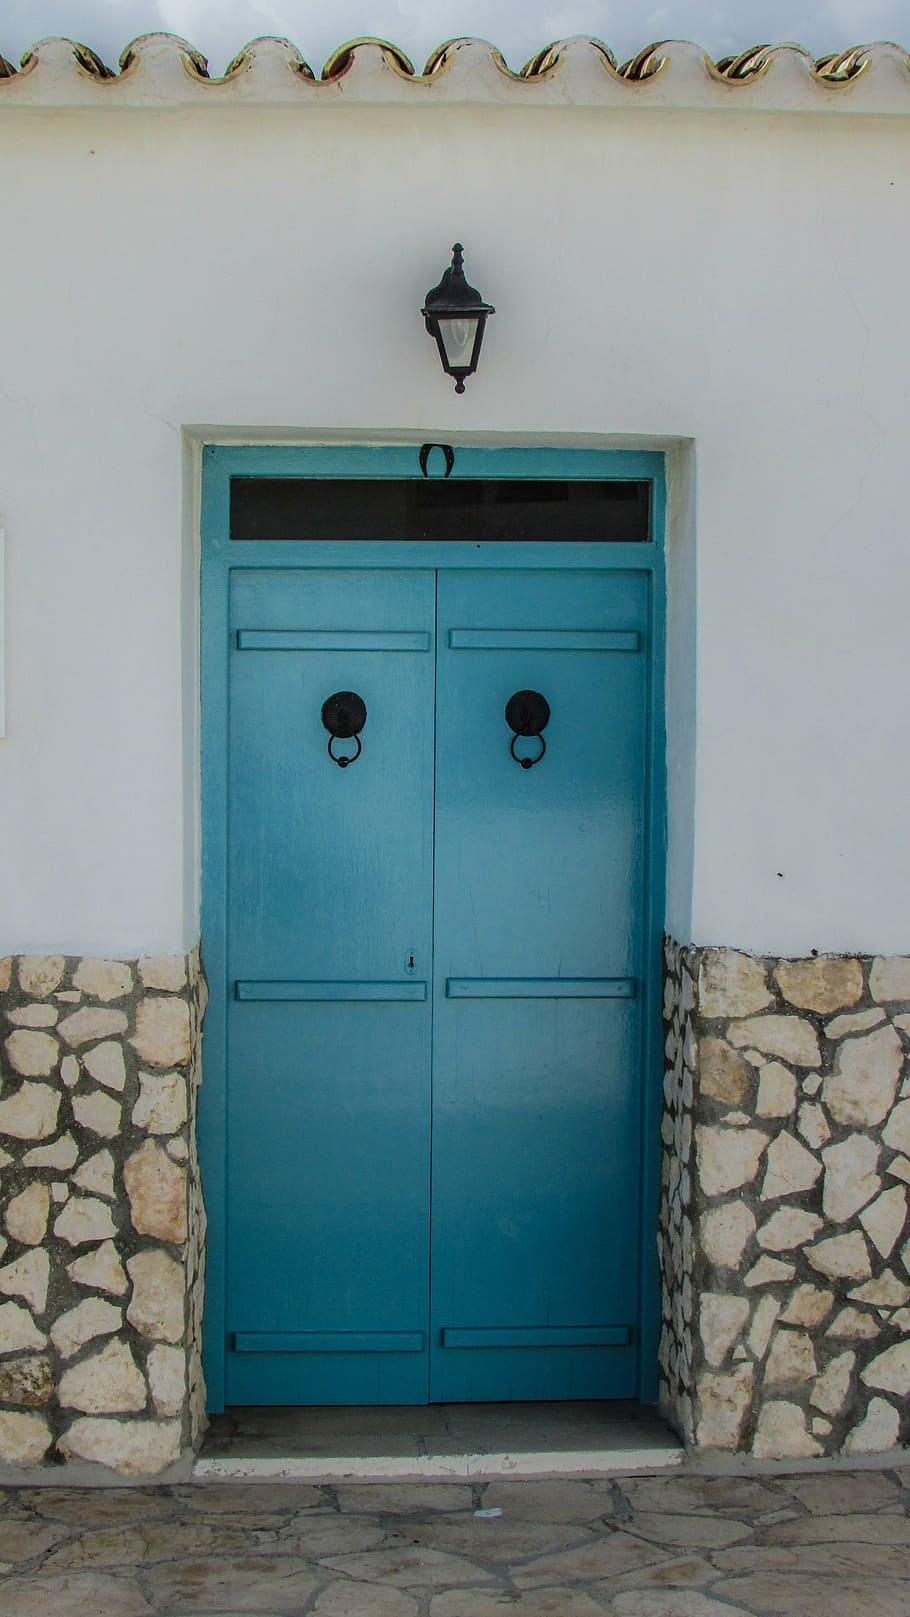 cyprus, paralimni, old house, door, traditional, architecture